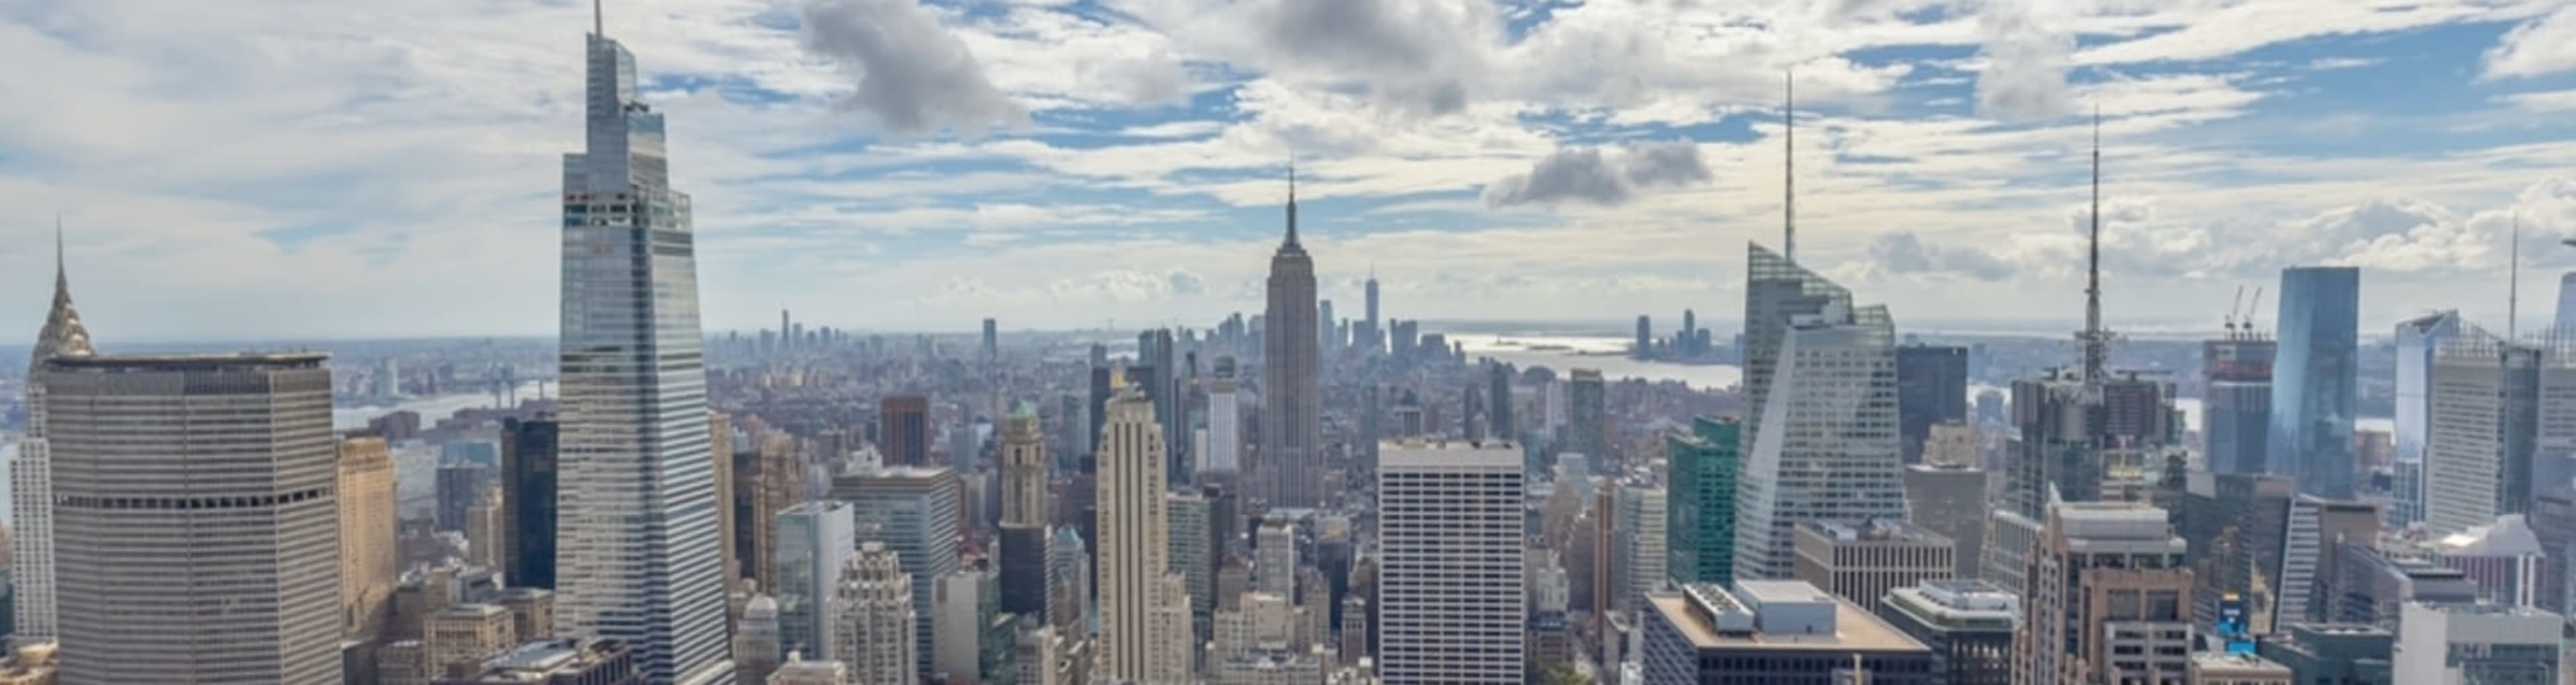 Manhattan's skyline with both the Empire State Building and One Vanderbilt in view.